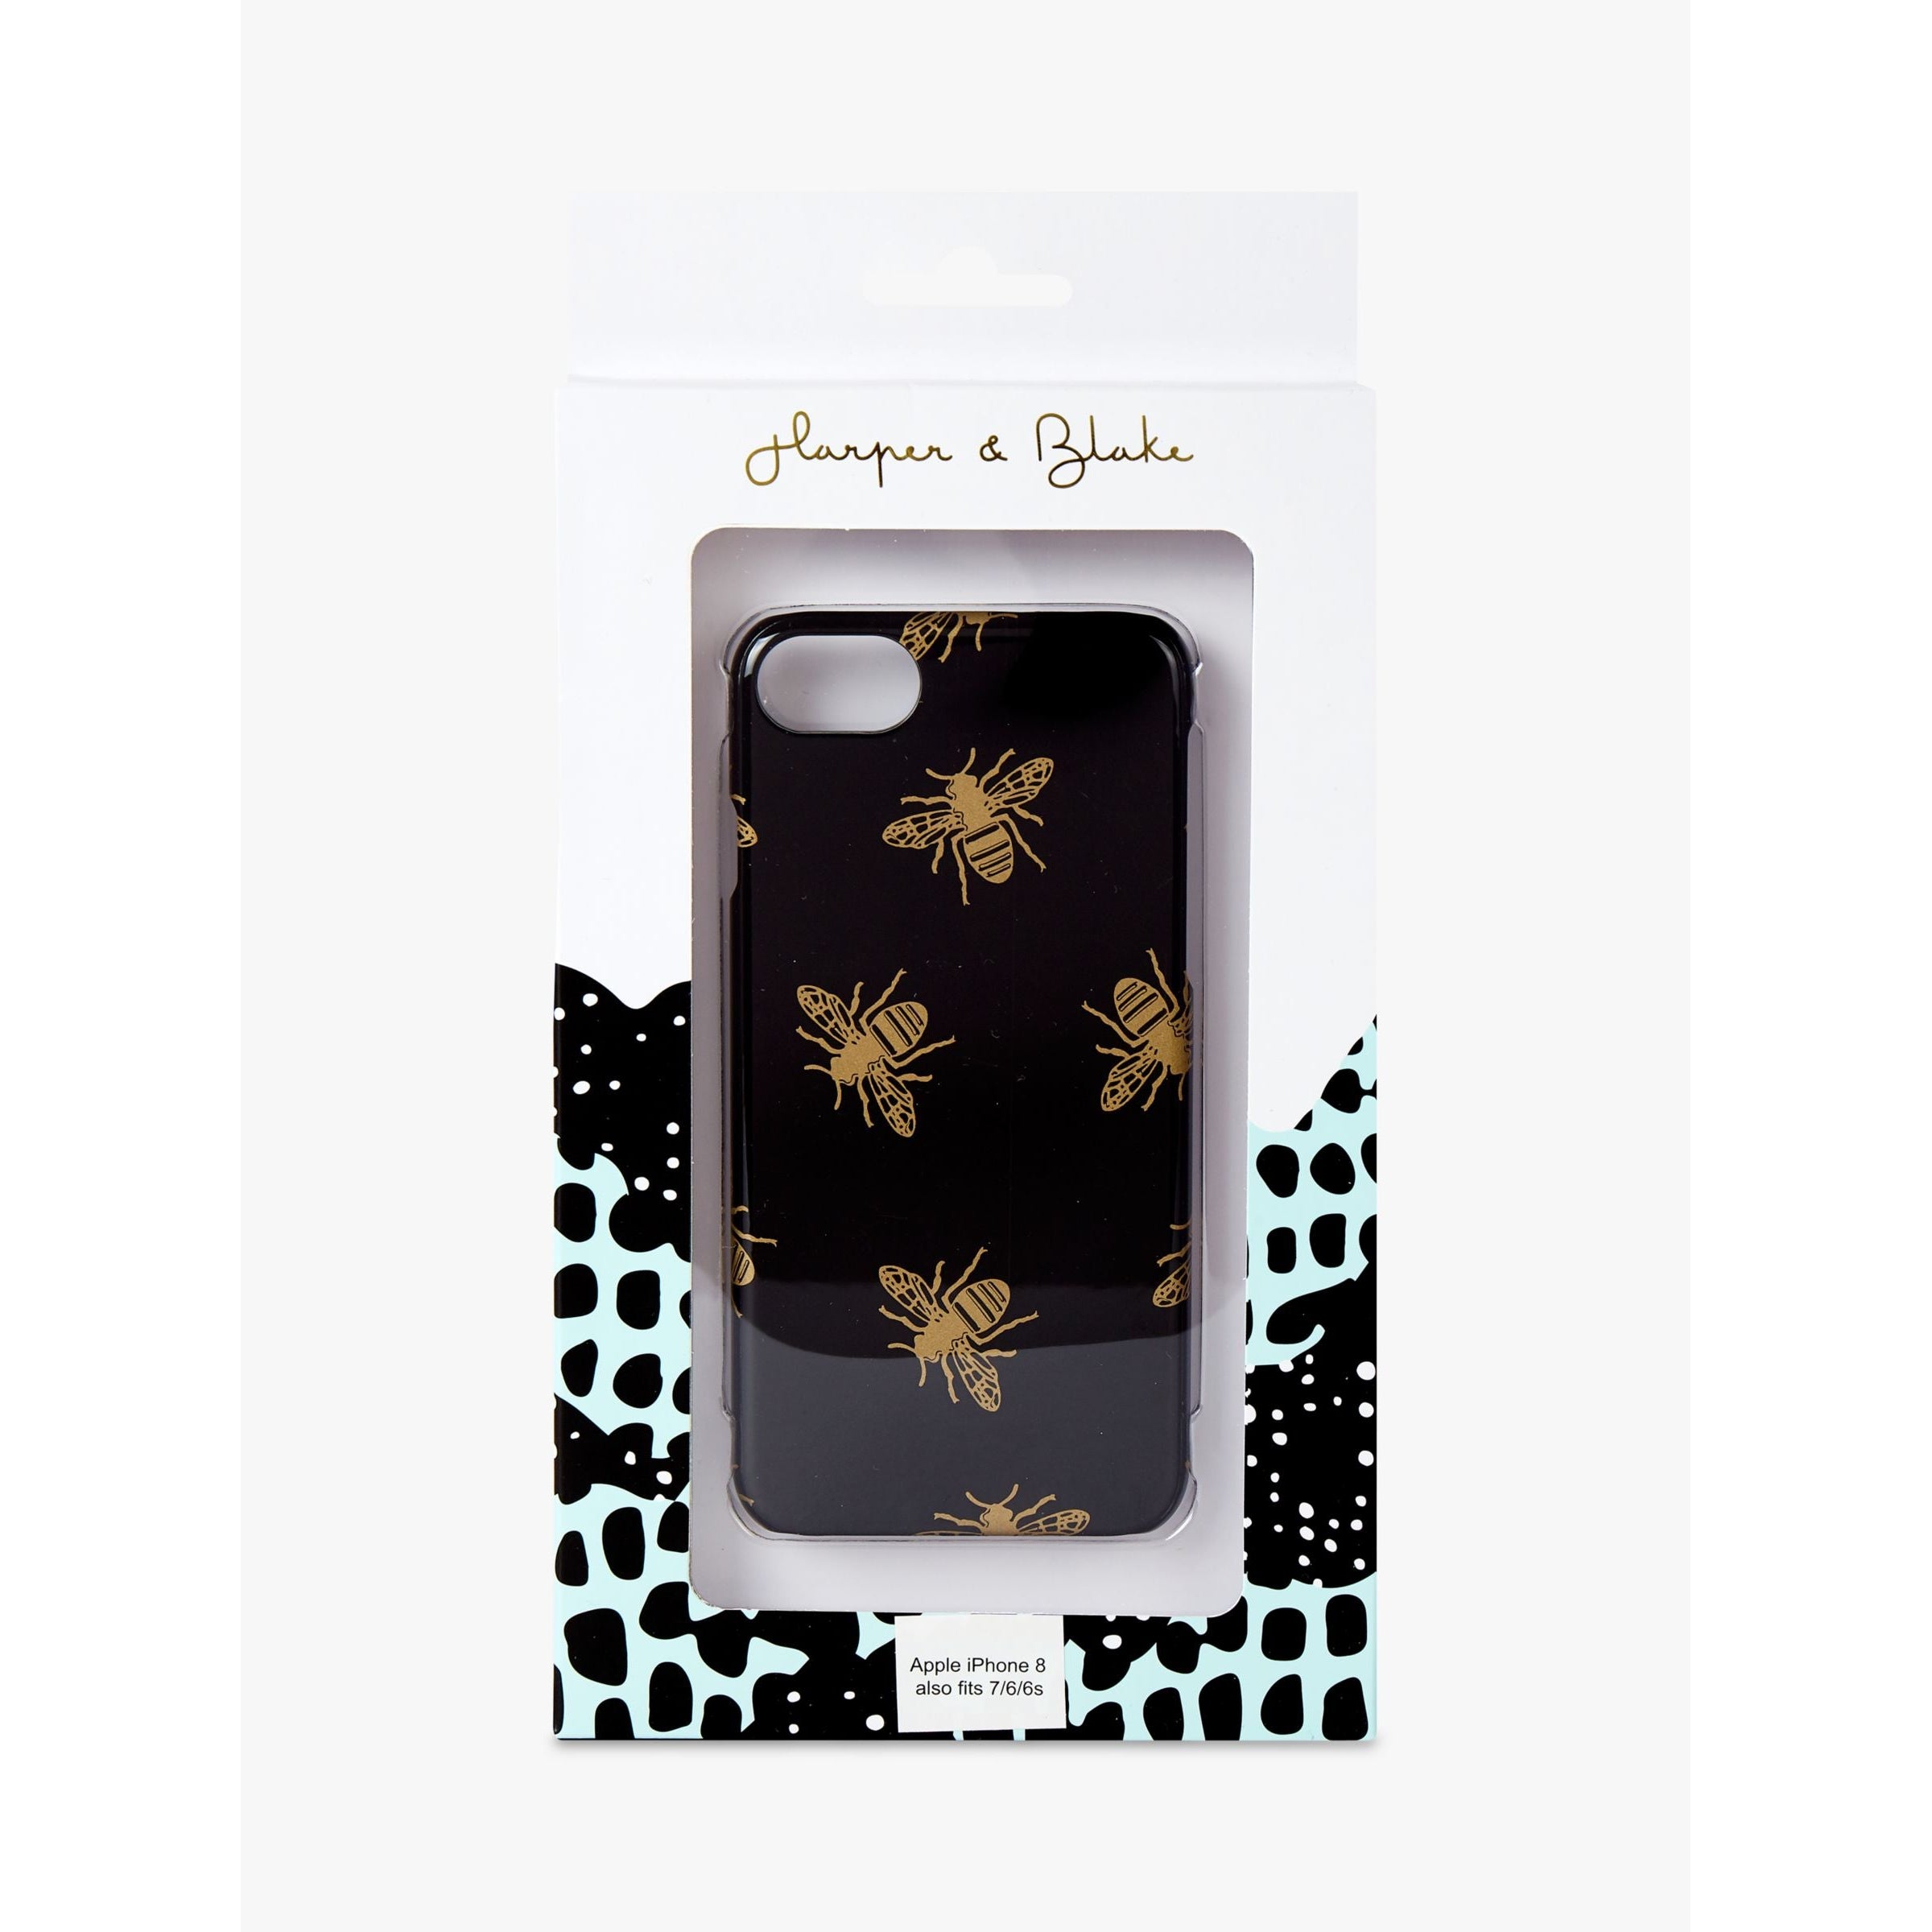 Harper & Blake Bees Case for iPhone 7/8